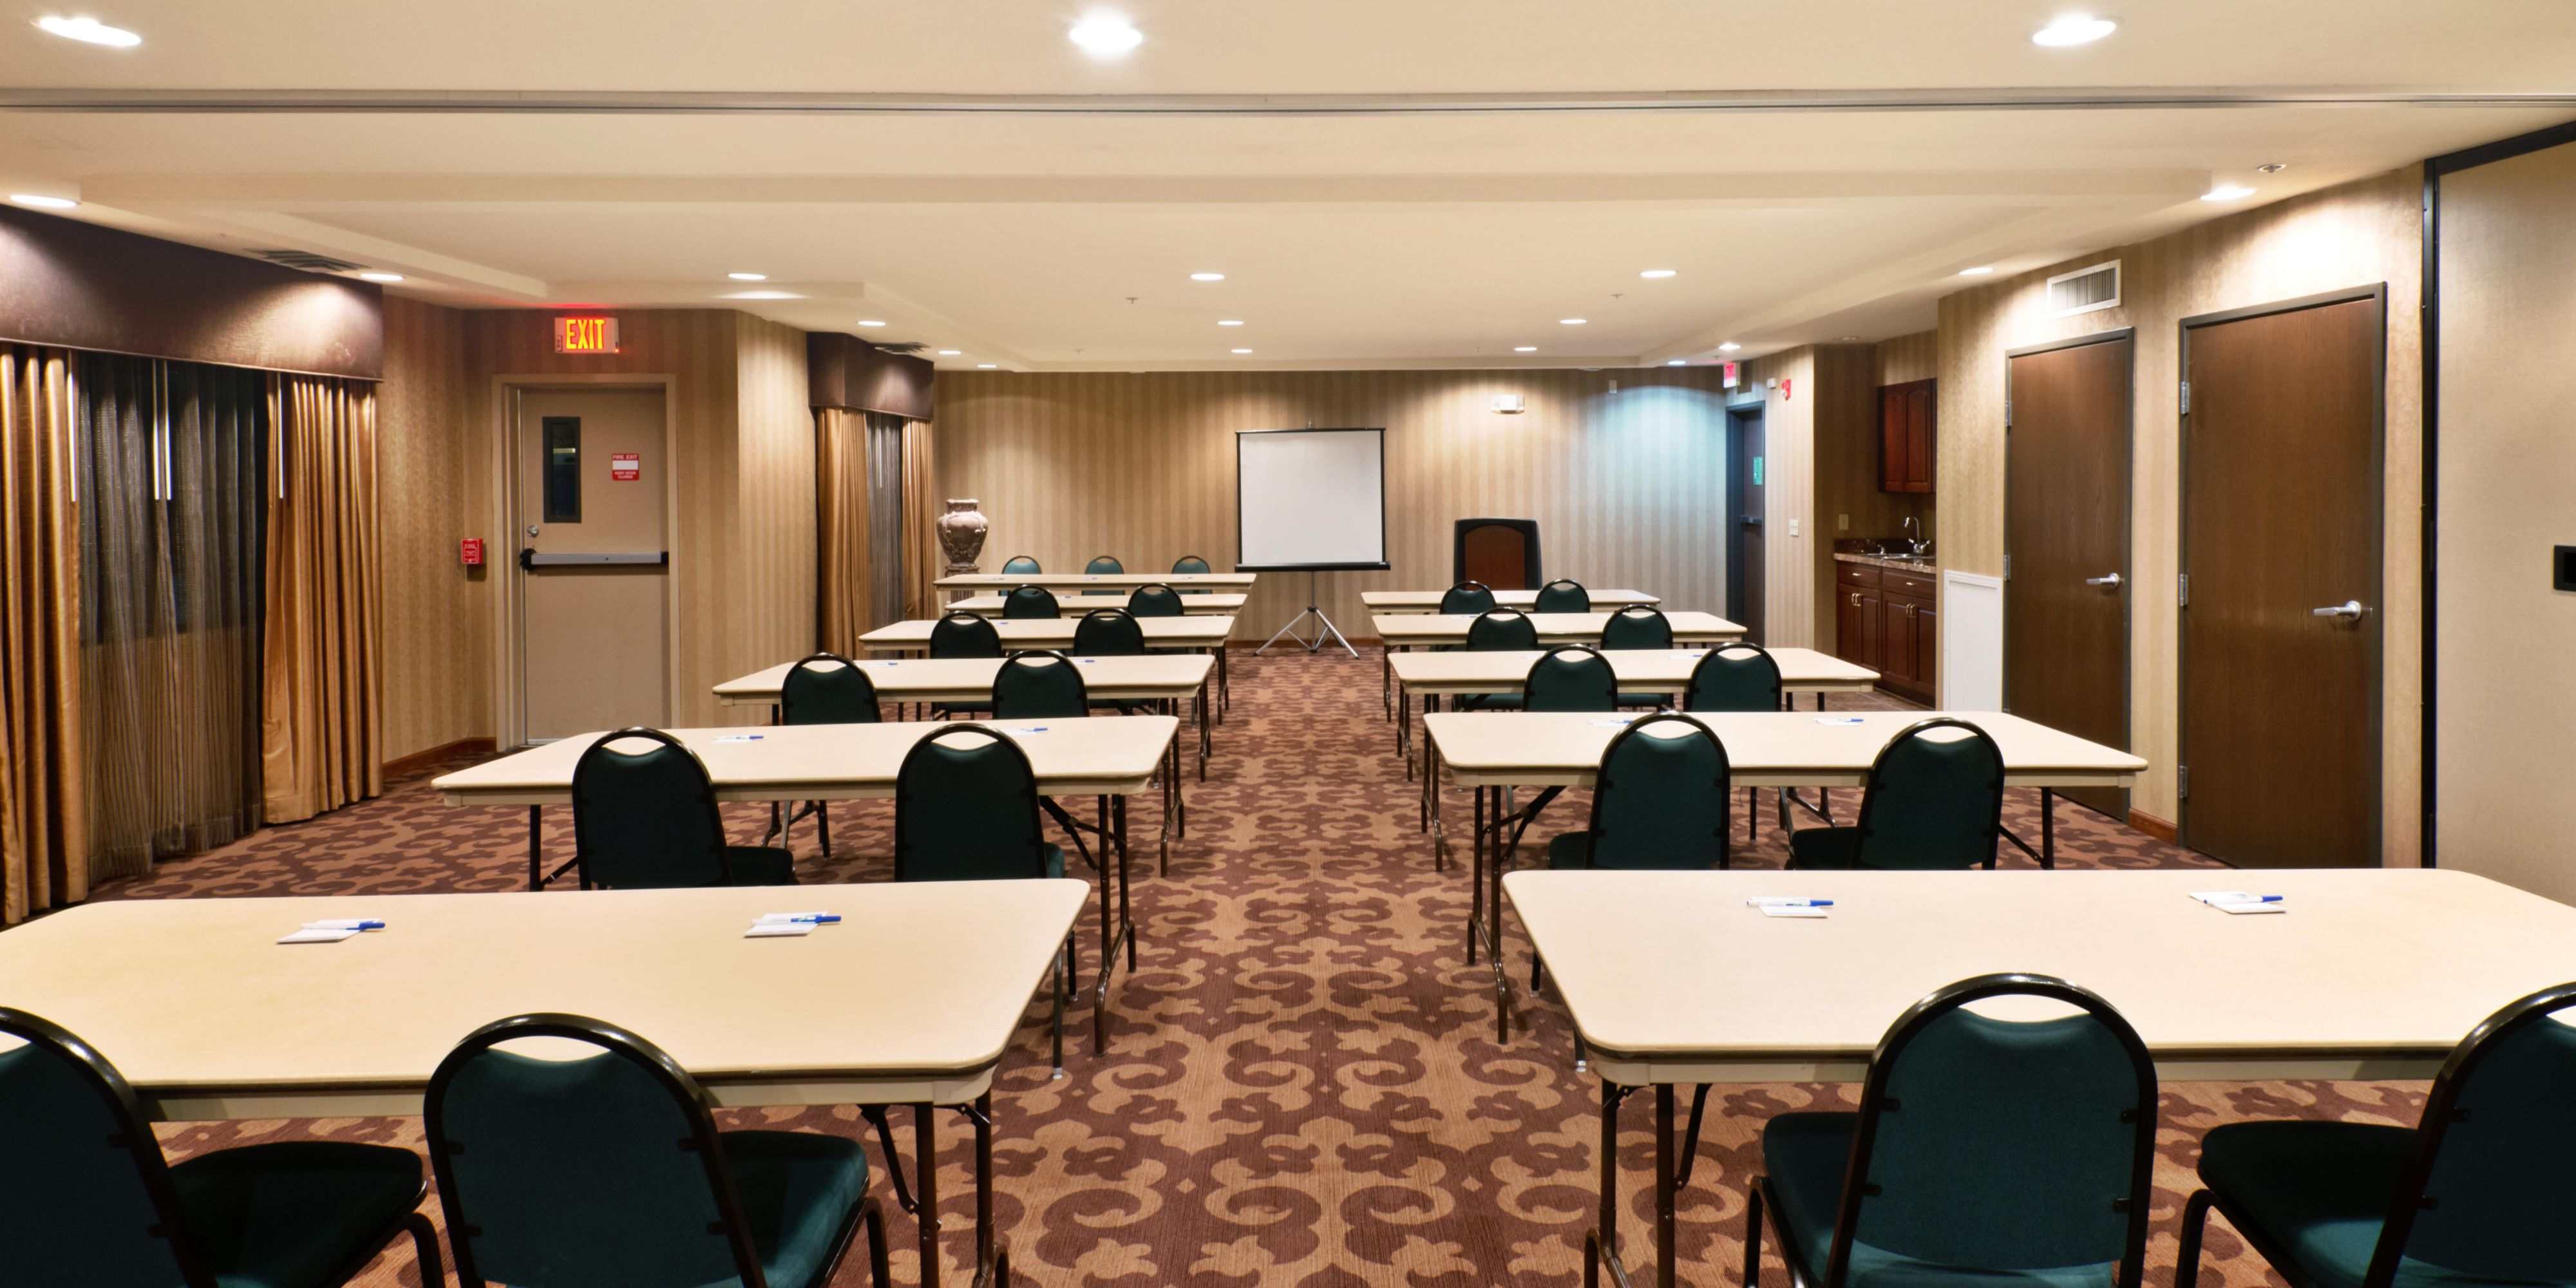 The Holiday Inn Express Show Low boasts 1200 square feet of modernly appointed meeting space. The space can accommodate up to 100 meeting attendees depending on the style or layout of event space. The space can also be divided into two separate spaces. Call now to book your next event!